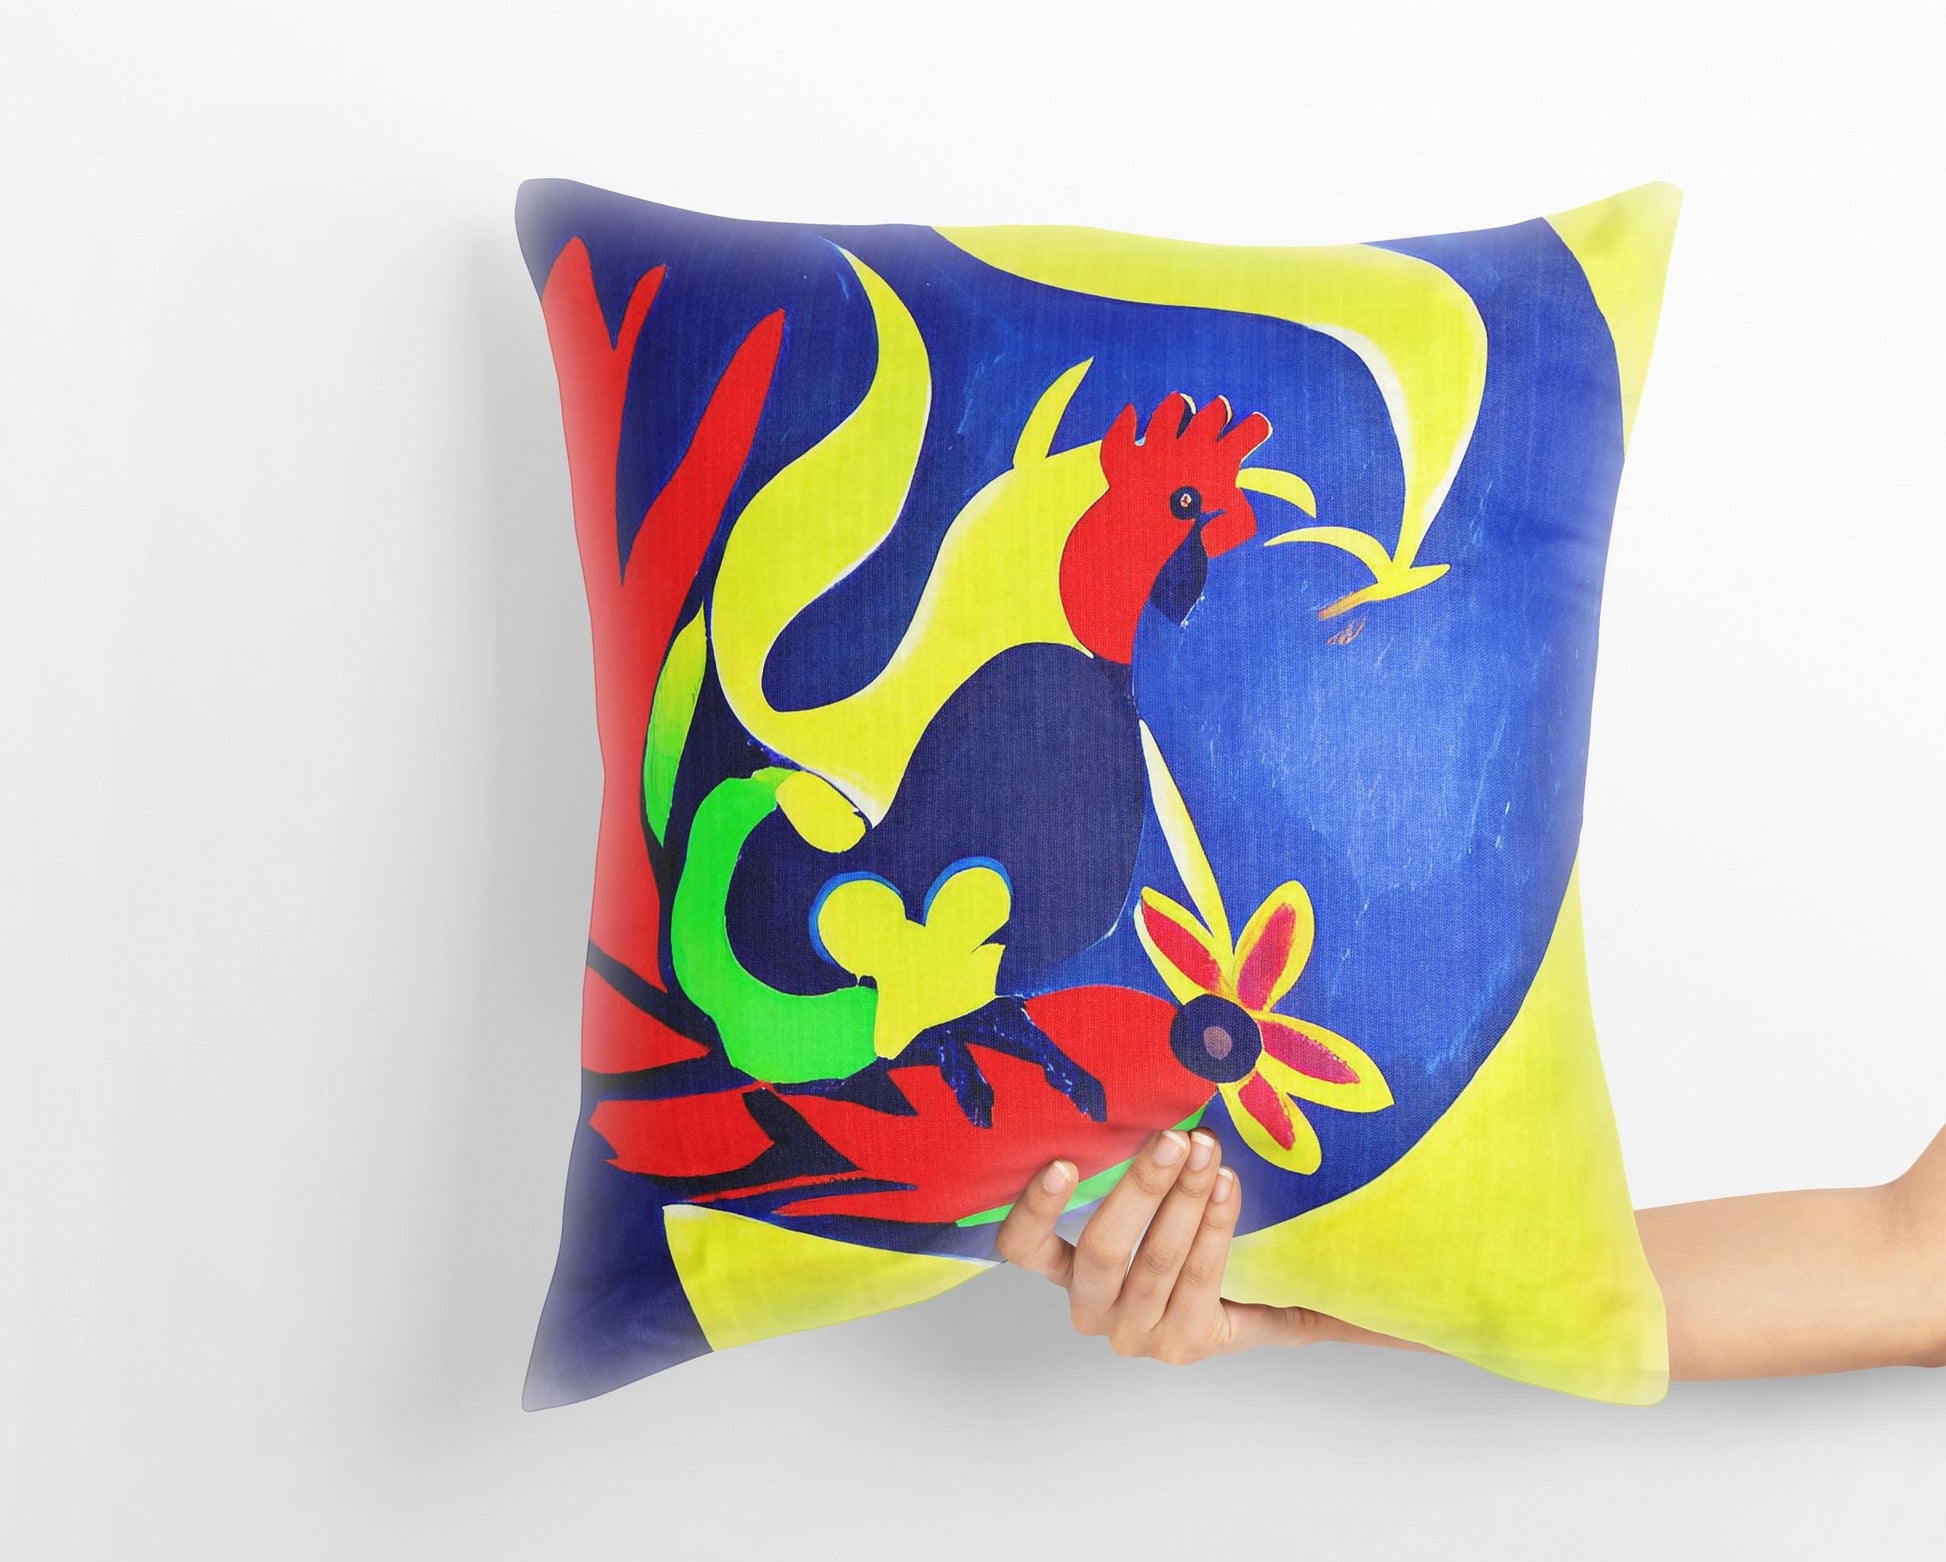 Original Art Rooster Toss Pillow, Abstract Pillow, Artist Pillow, Colorful Pillow Case, 24X24 Pillow Case, Playroom Decor, Holiday Gift